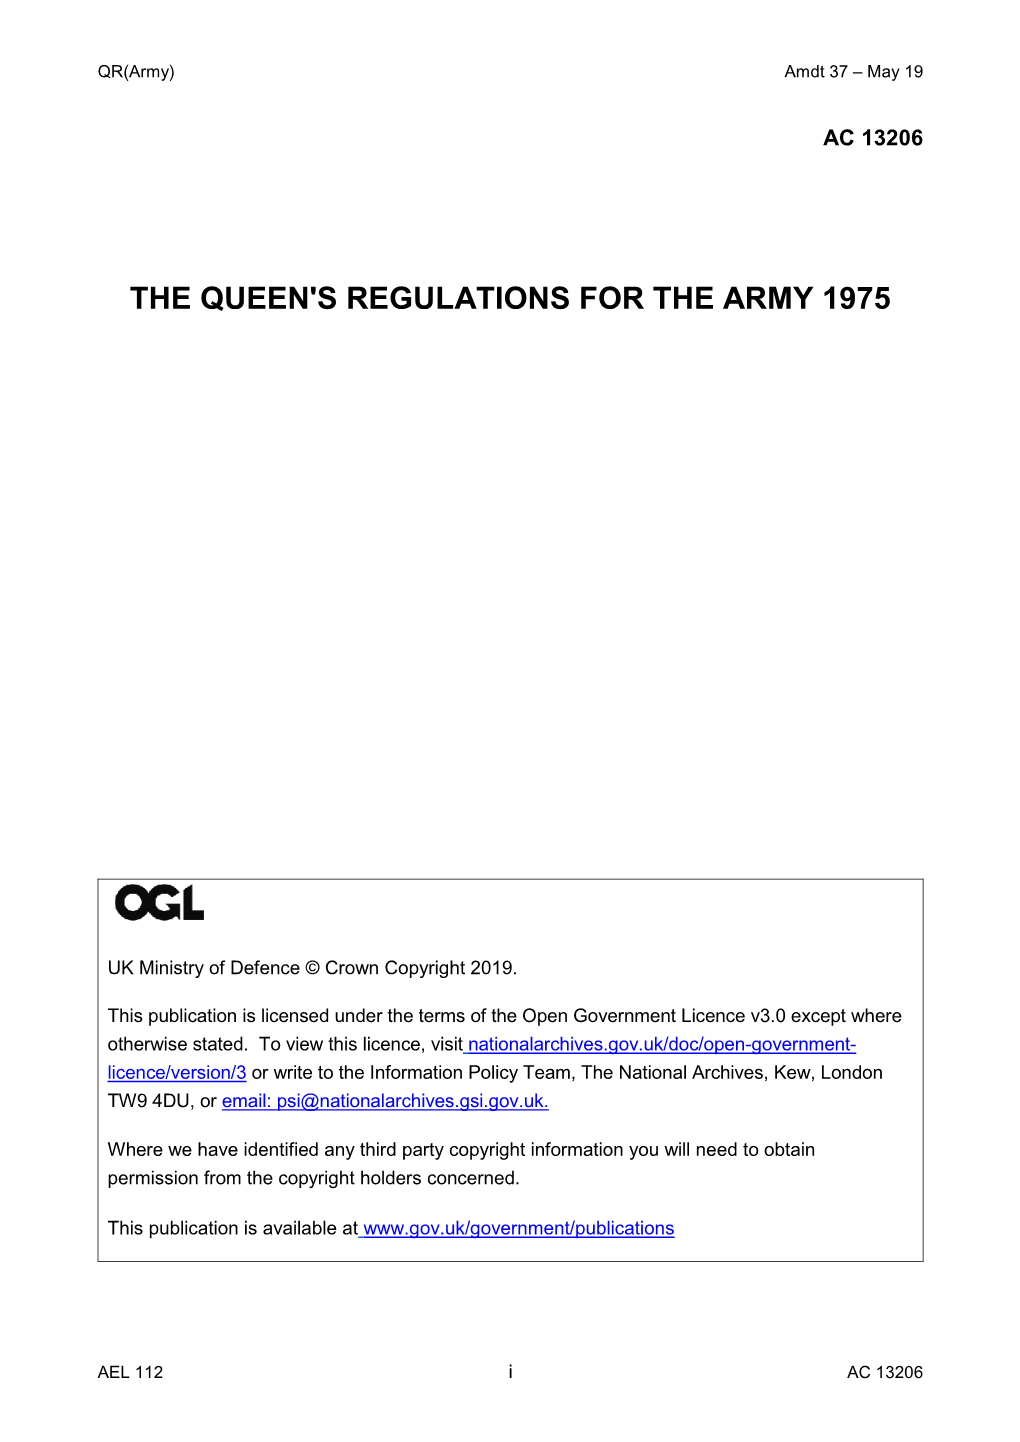 The Queen's Regulations for the Army 1975